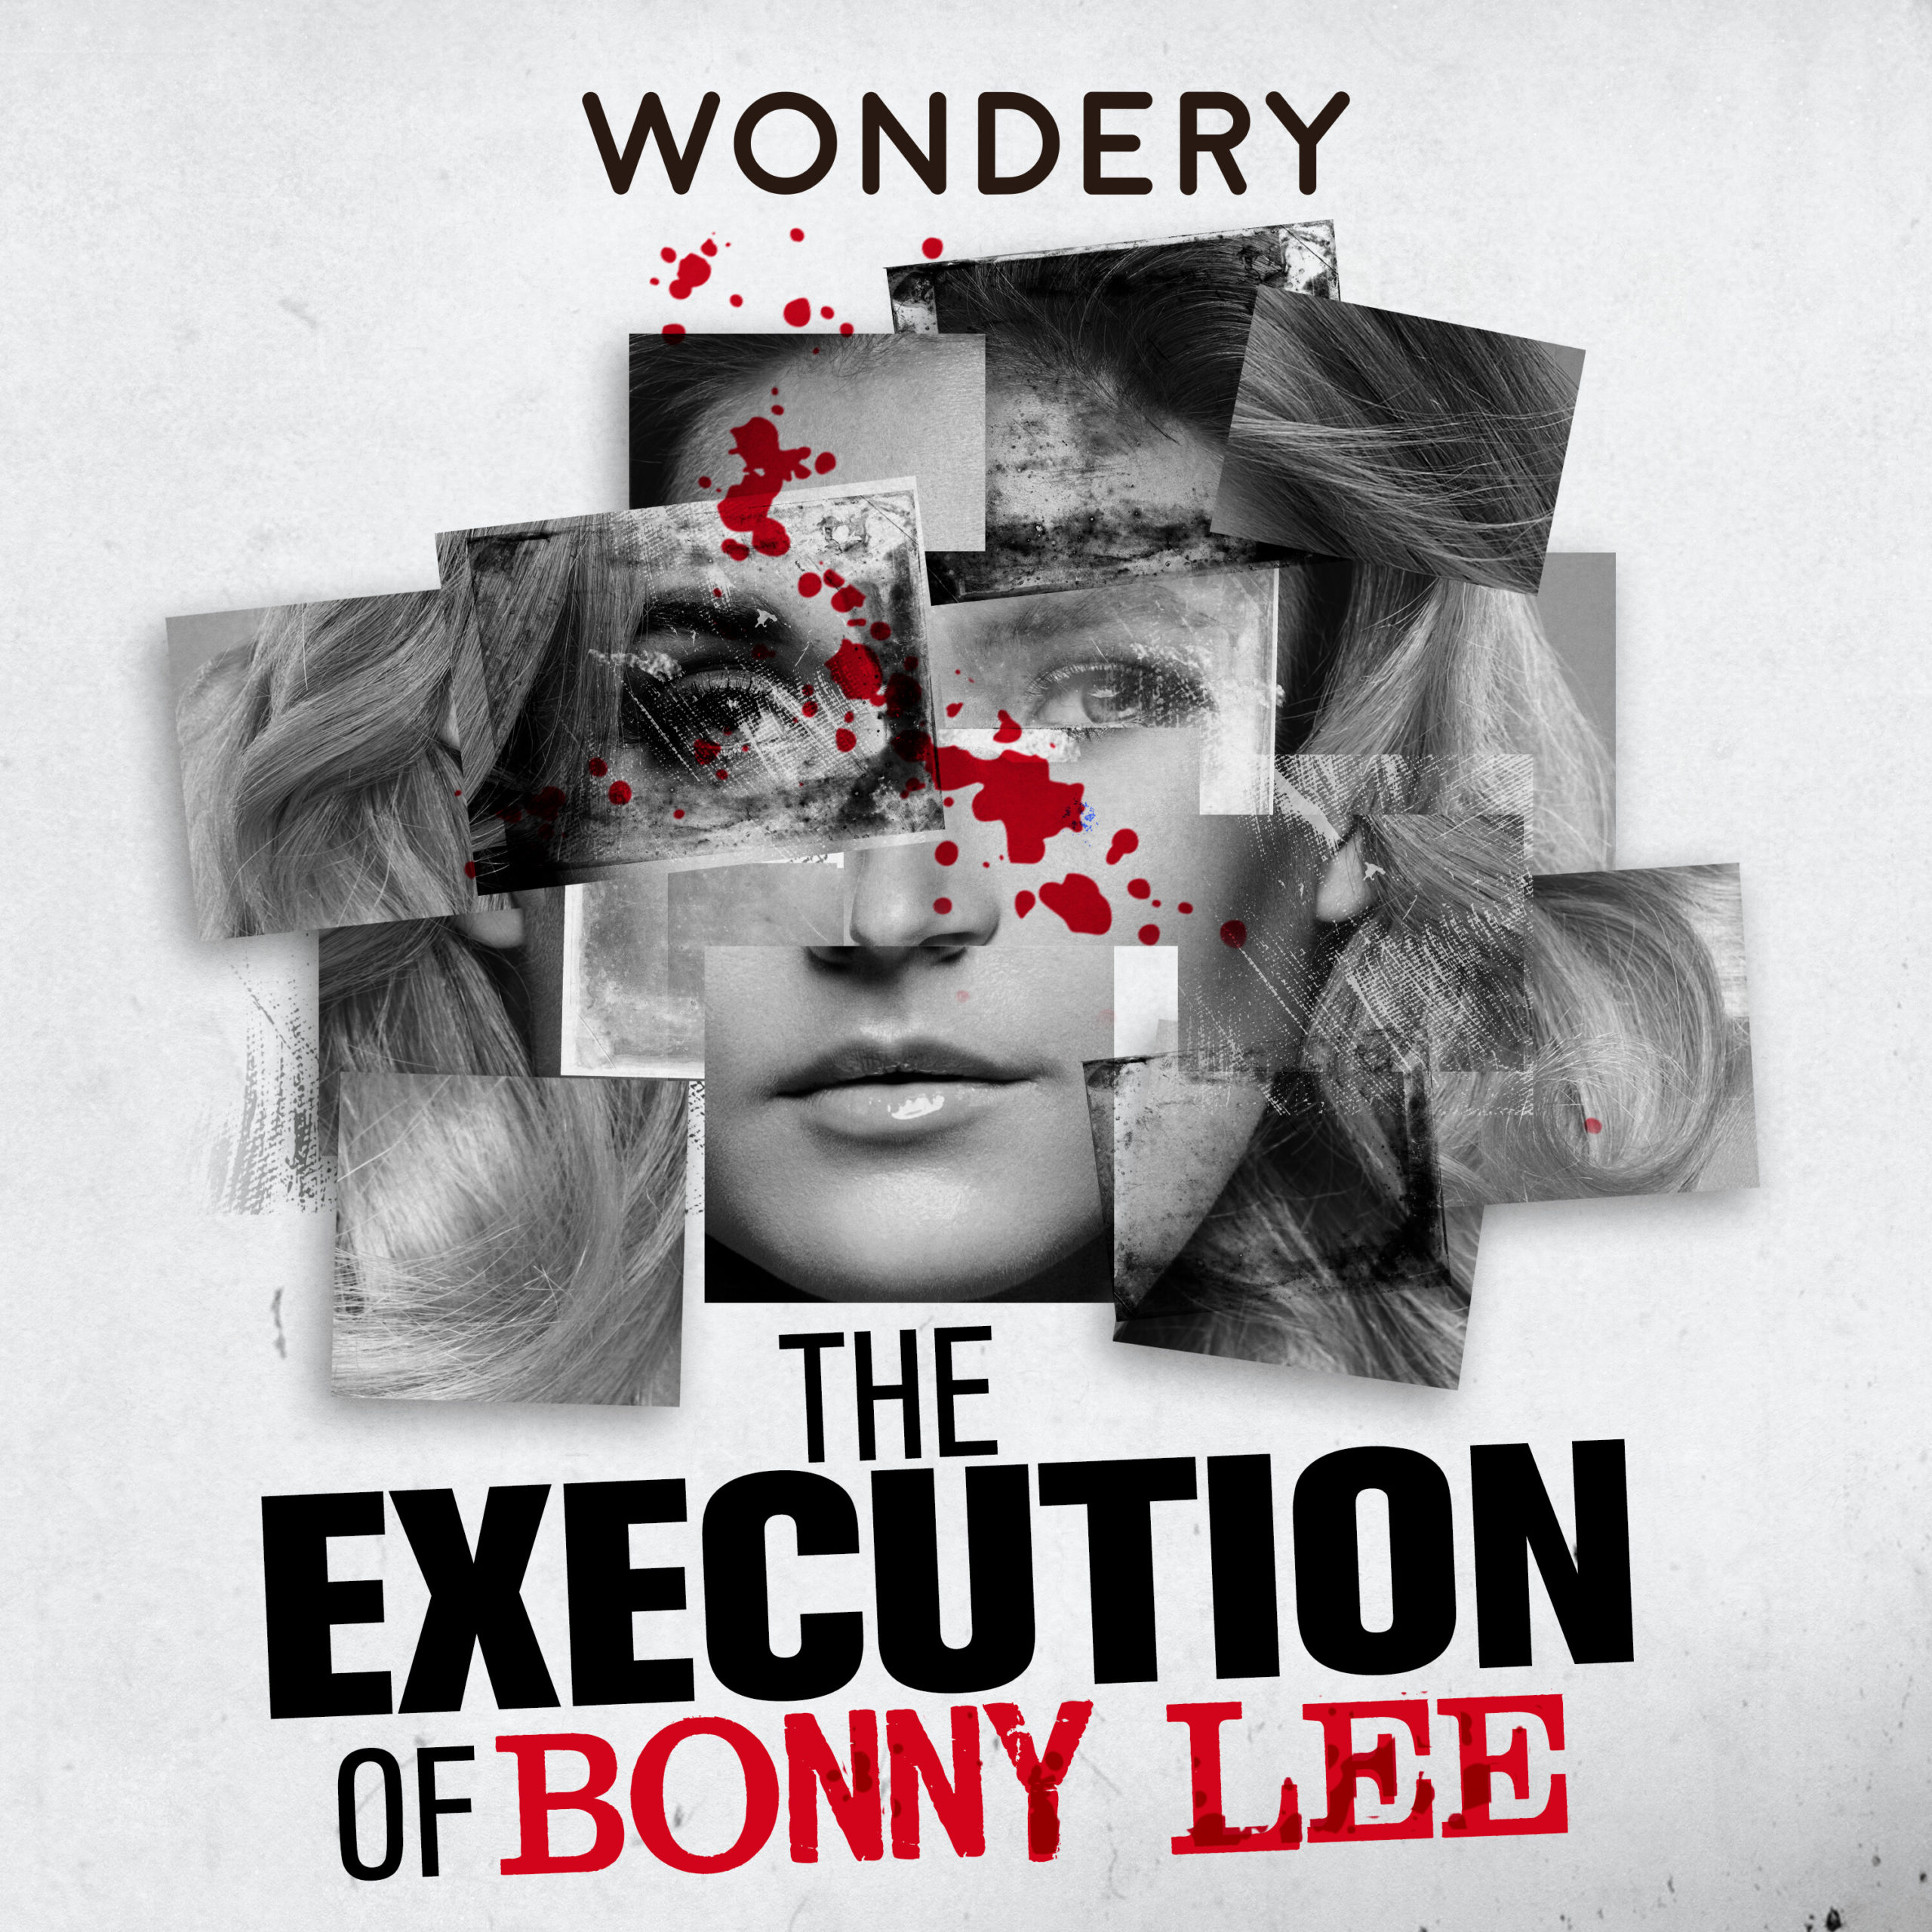 The Execution of Bonny Lee' examines a con artist & a murder case